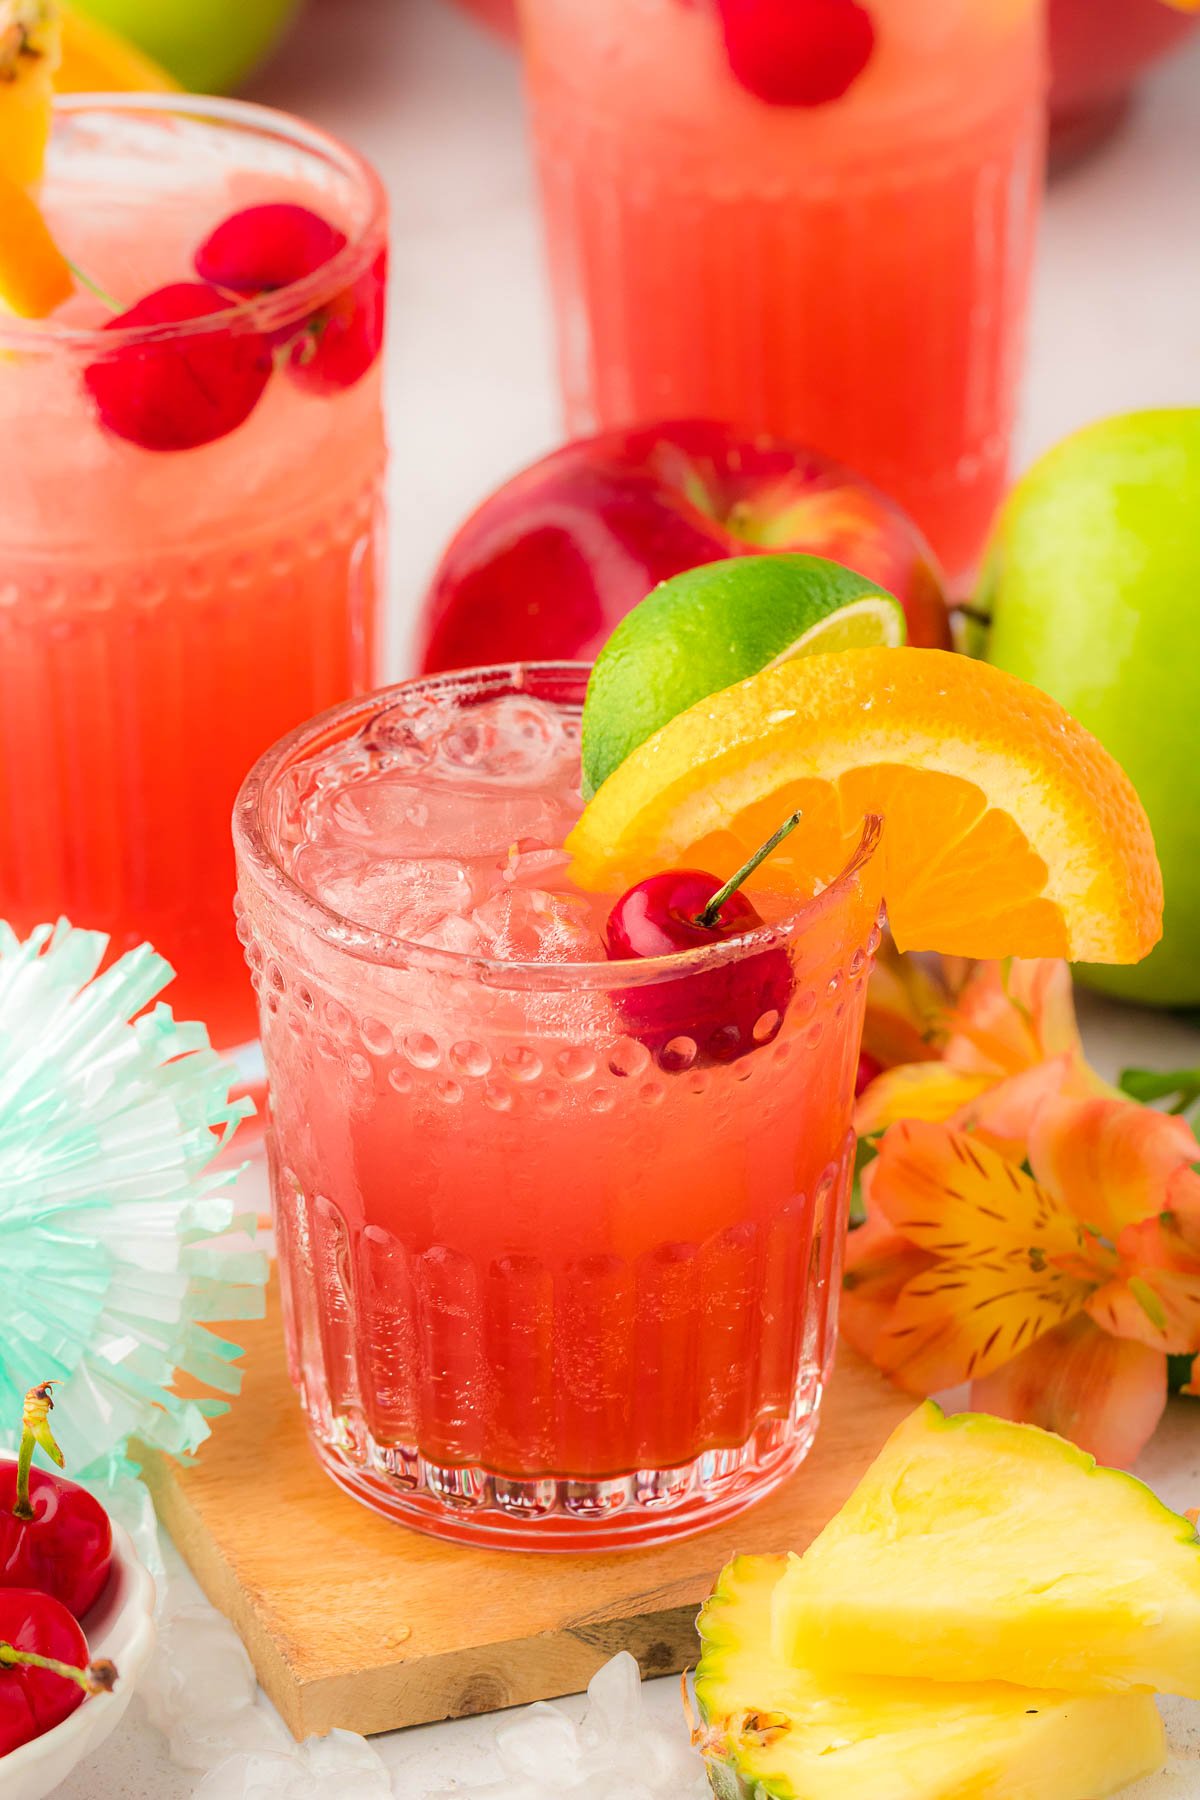 A glass of fruit punch on a wooden coaster with more glasses and fruit in the background.